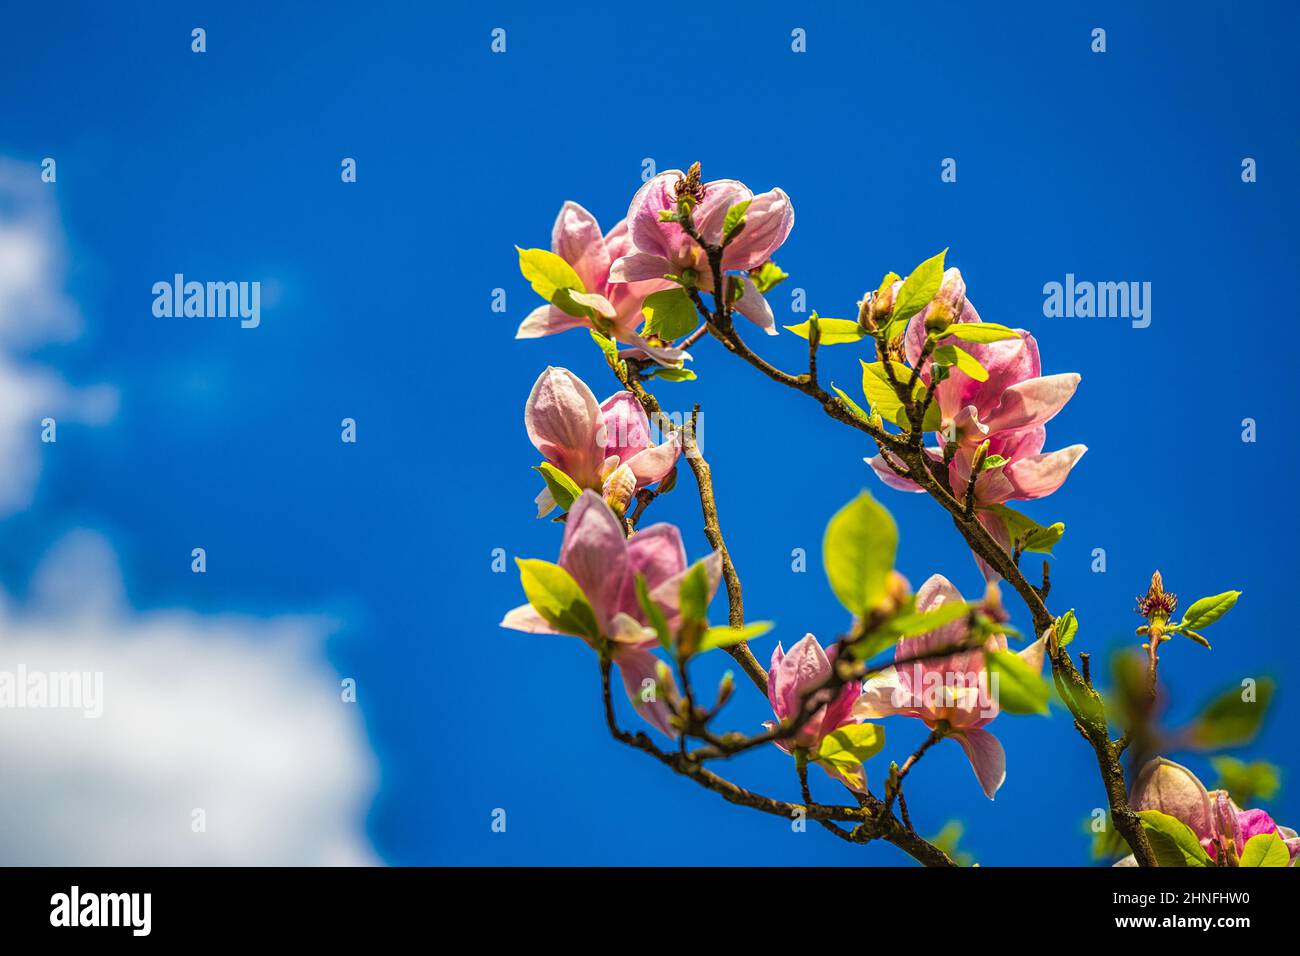 Blooming flower of magnolia tree with blue sky in background. Stock Photo